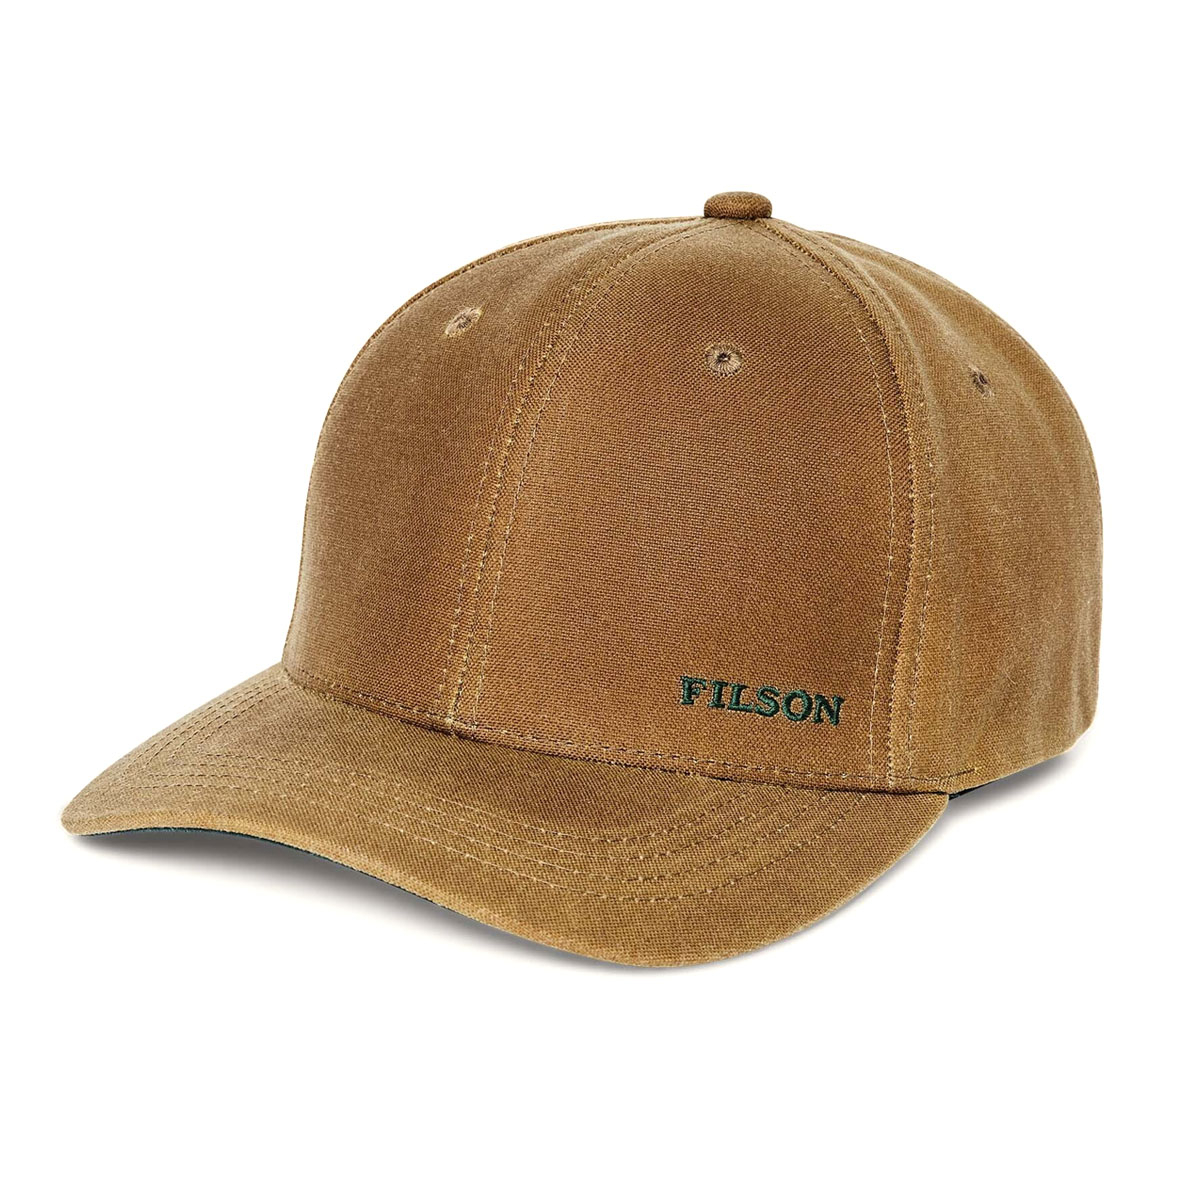 Filson Oil Tin Logger Cap Dark Tan, durable and water-resistant with the shape of a classic trucker cap